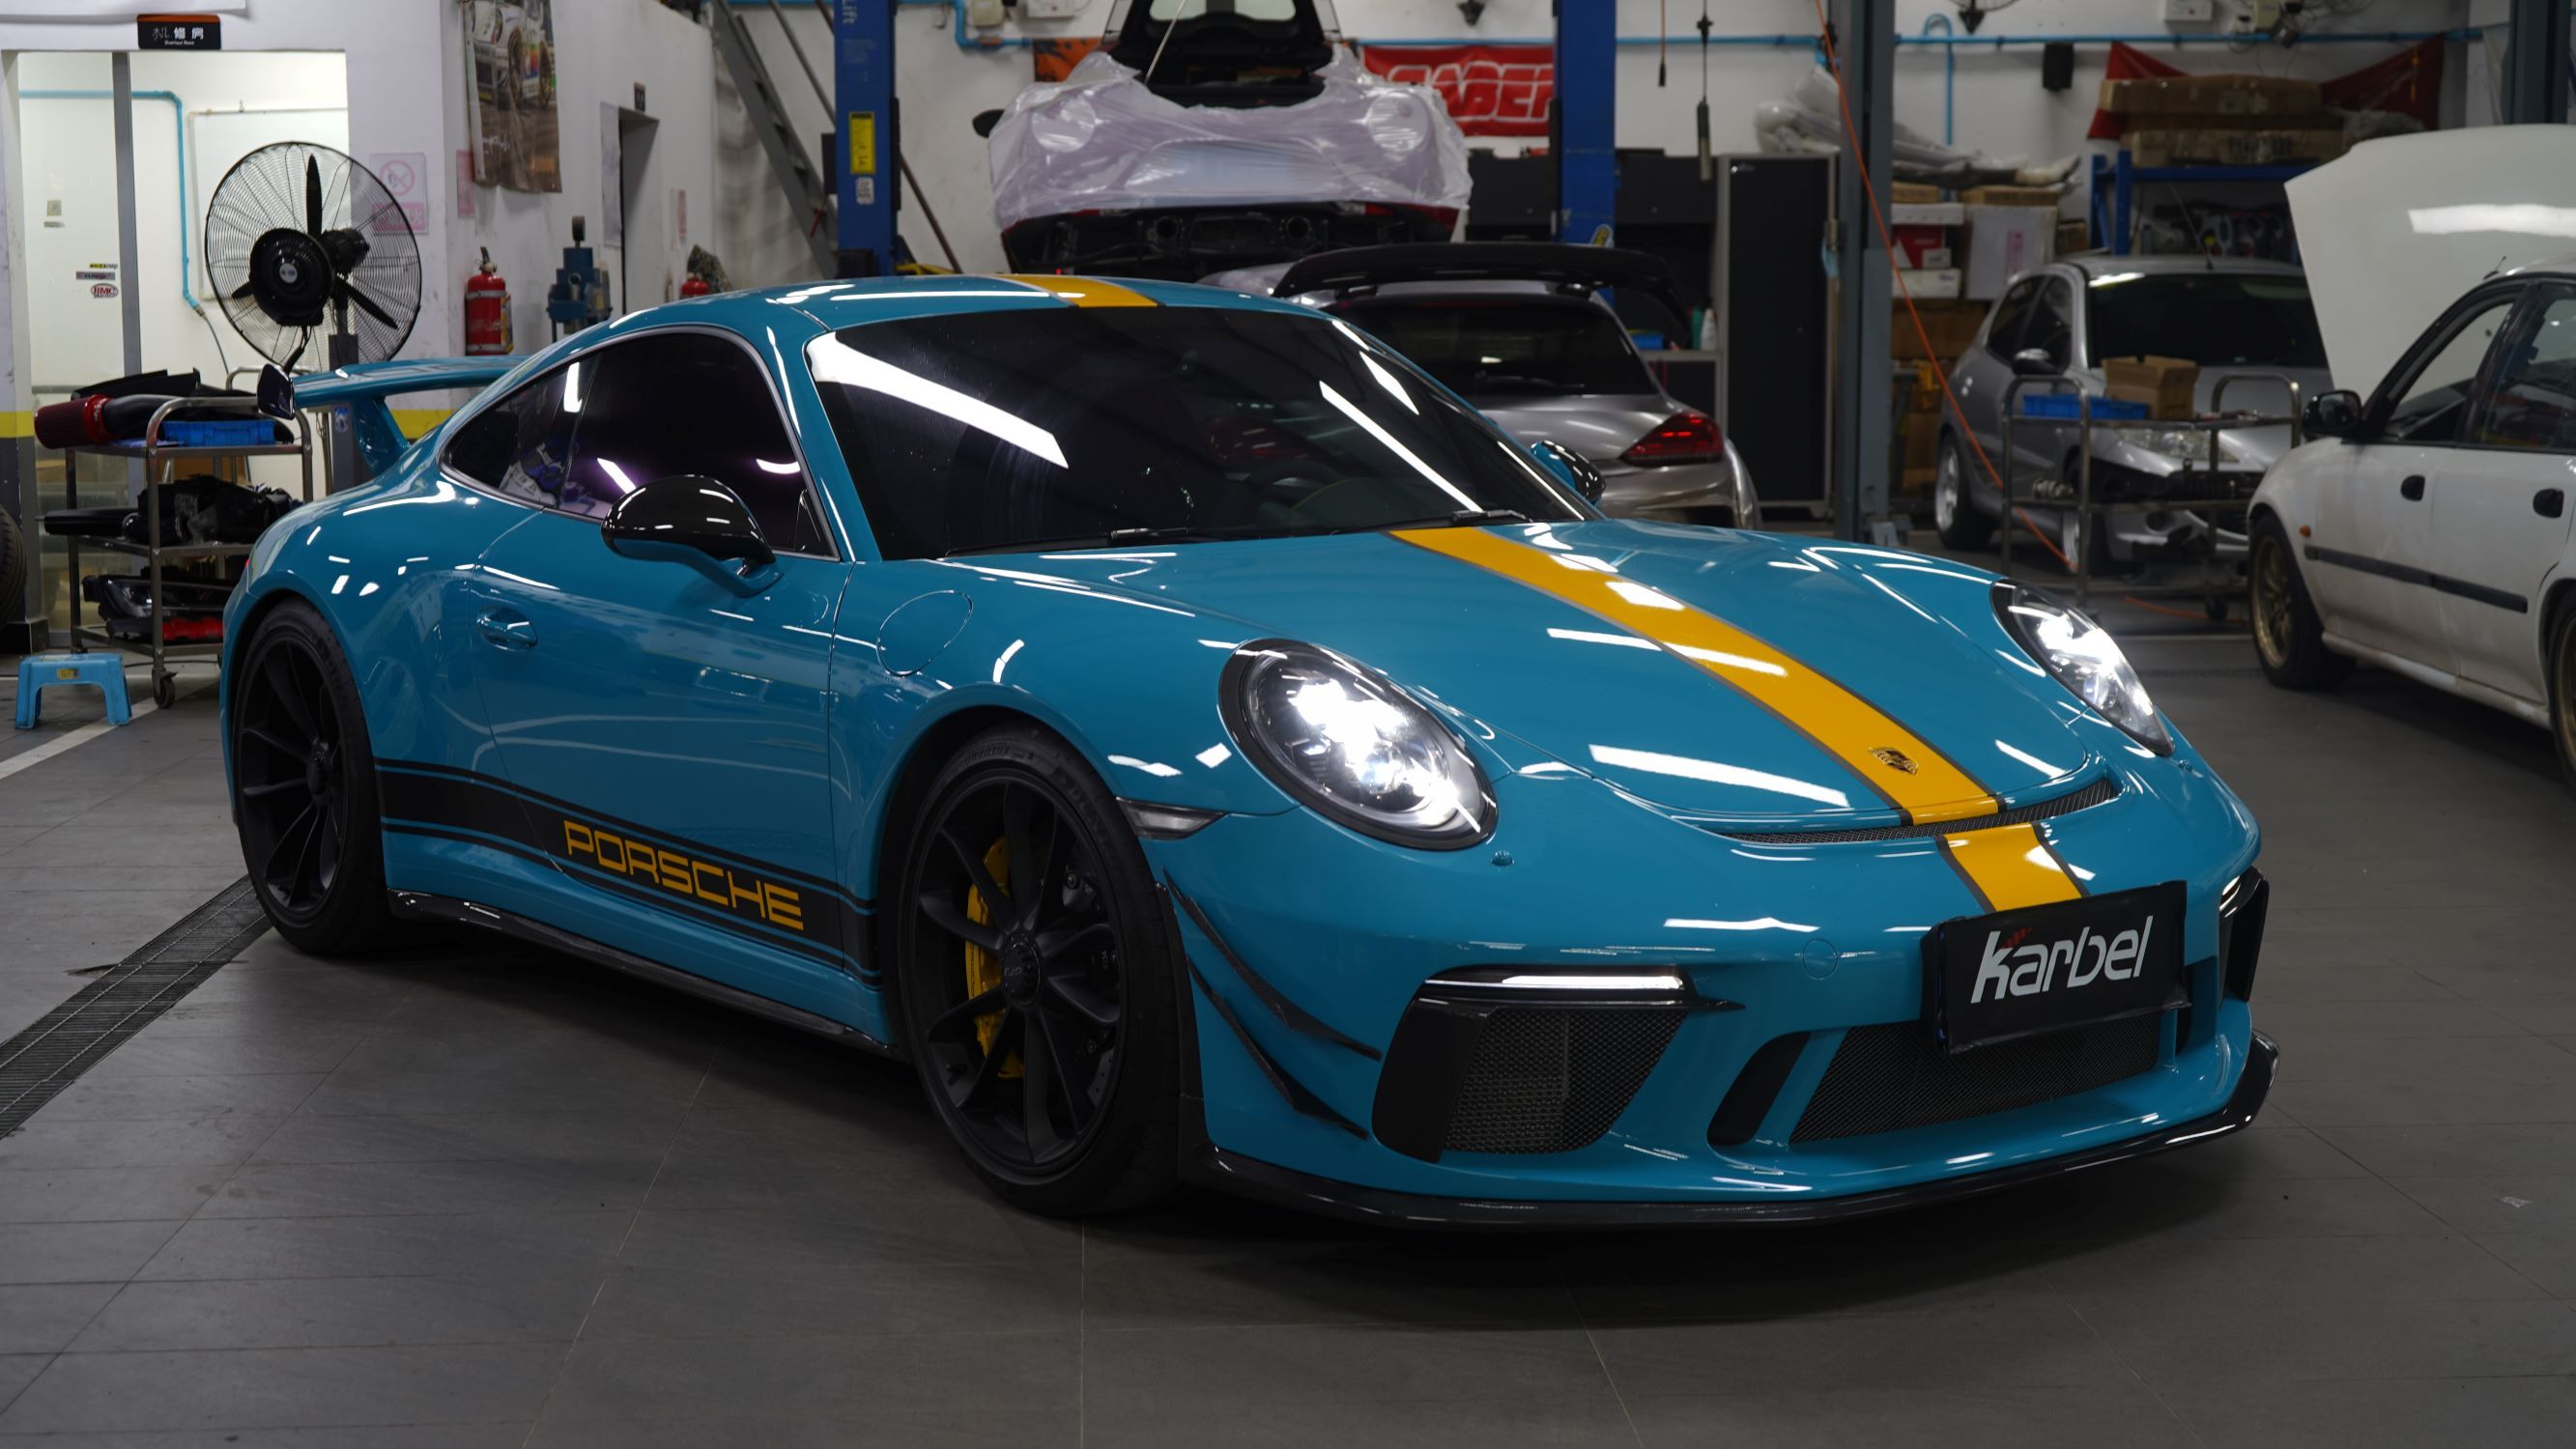 Check our price and buy a Karbel Carbon Fiber Body Kit set for Porsche 911 991.2 GT3